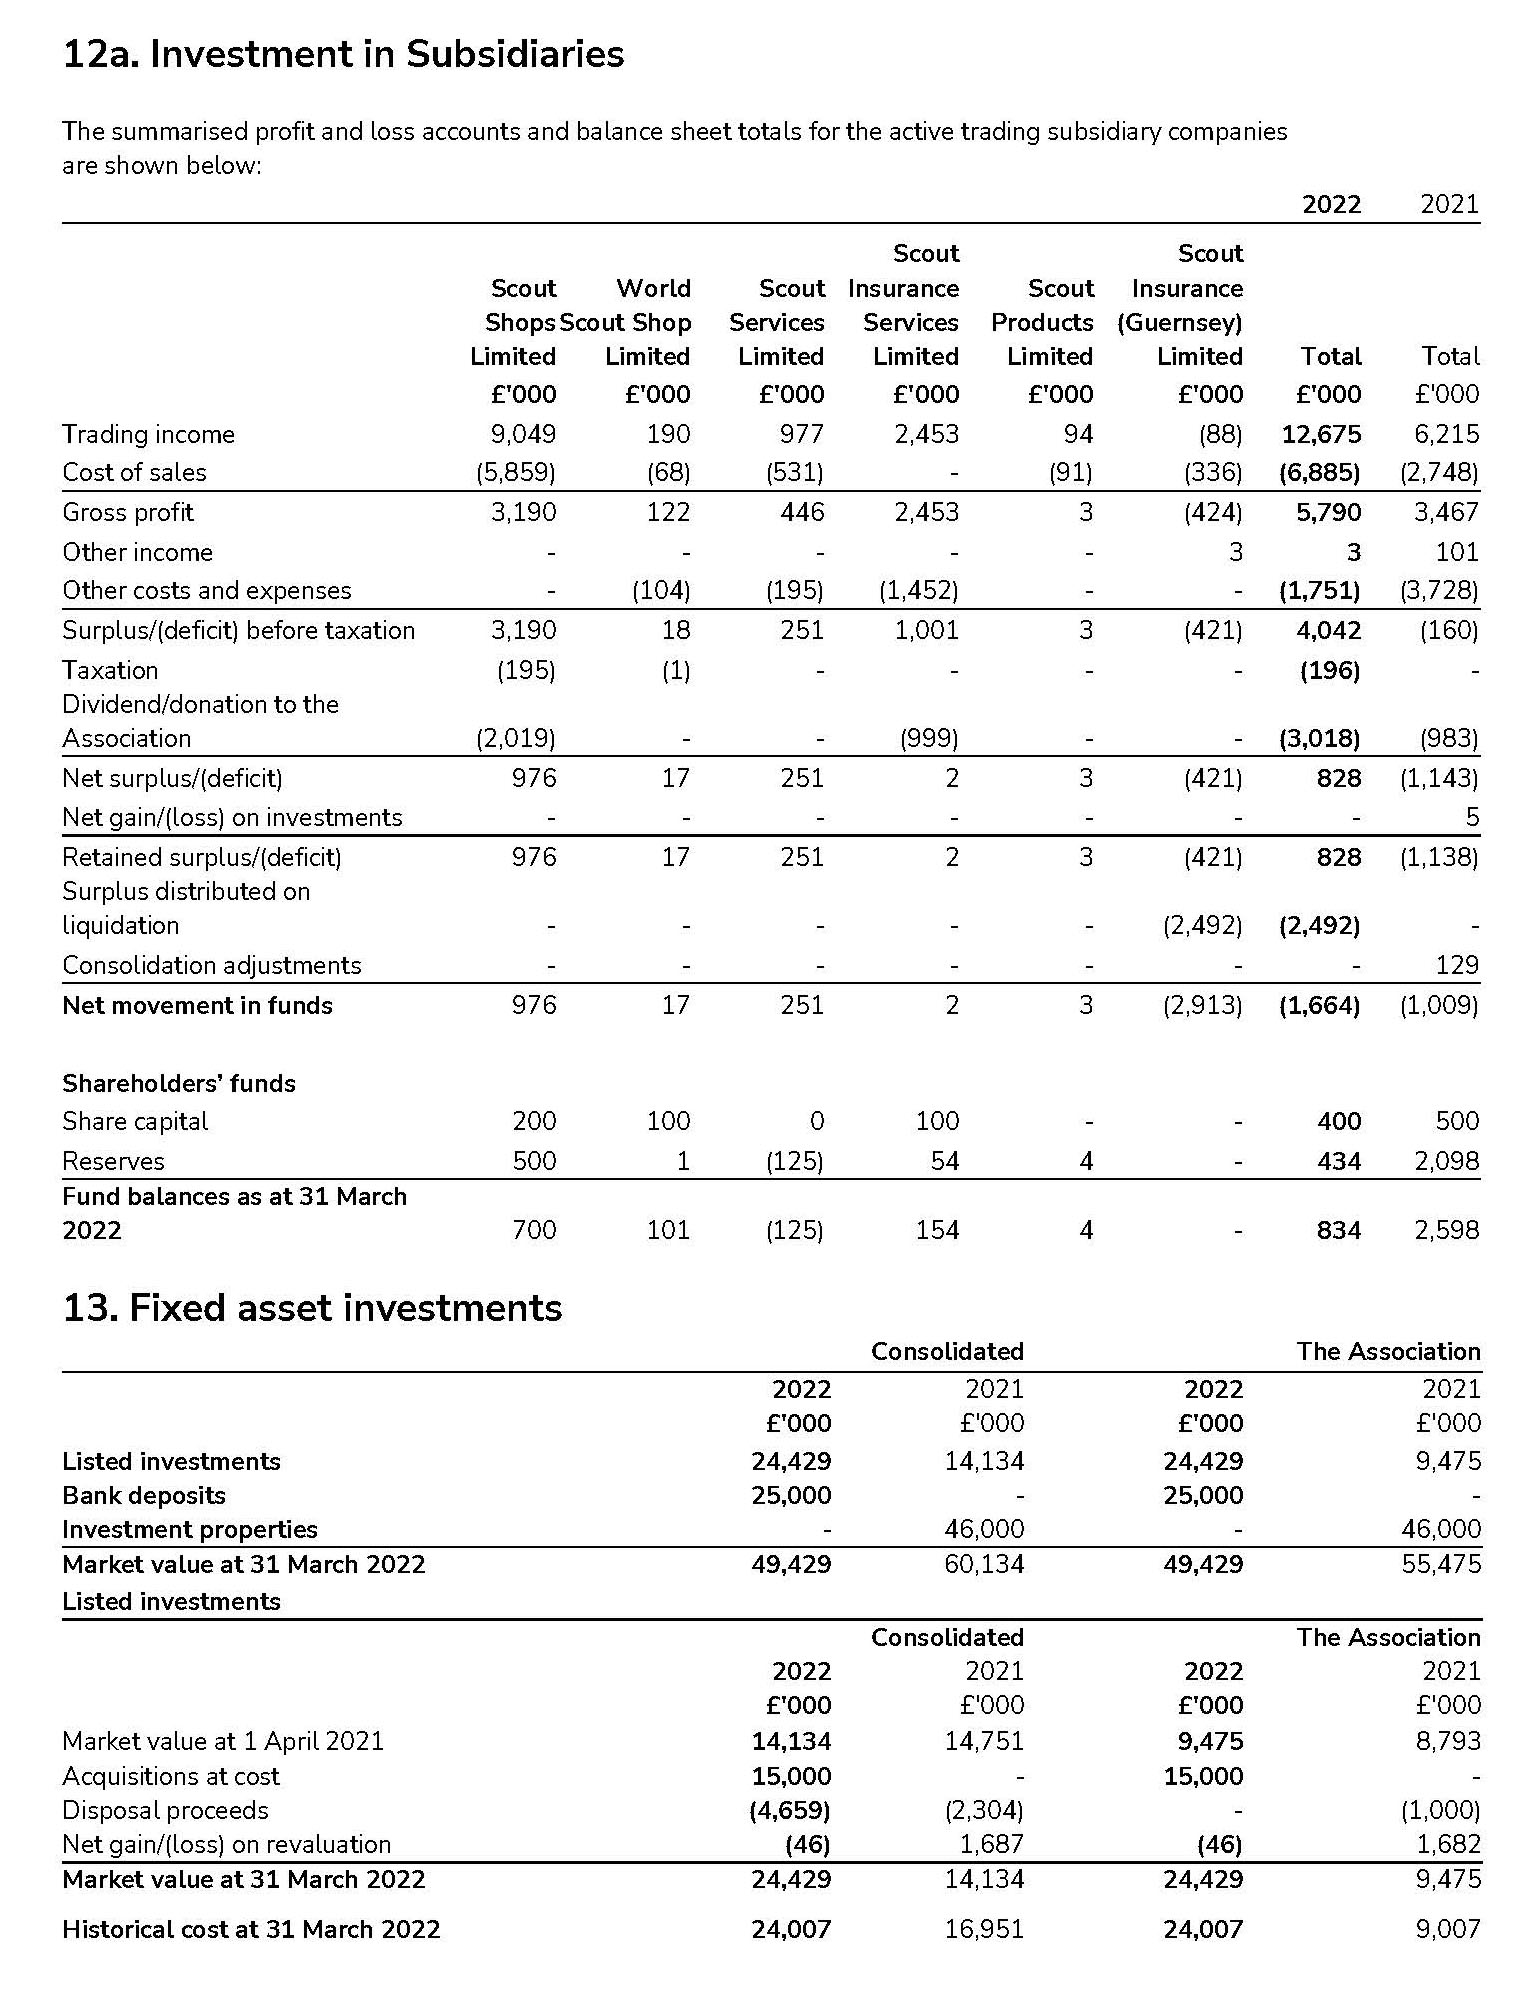 Table showing Scouts' investment in subsidiaries in 2021-22